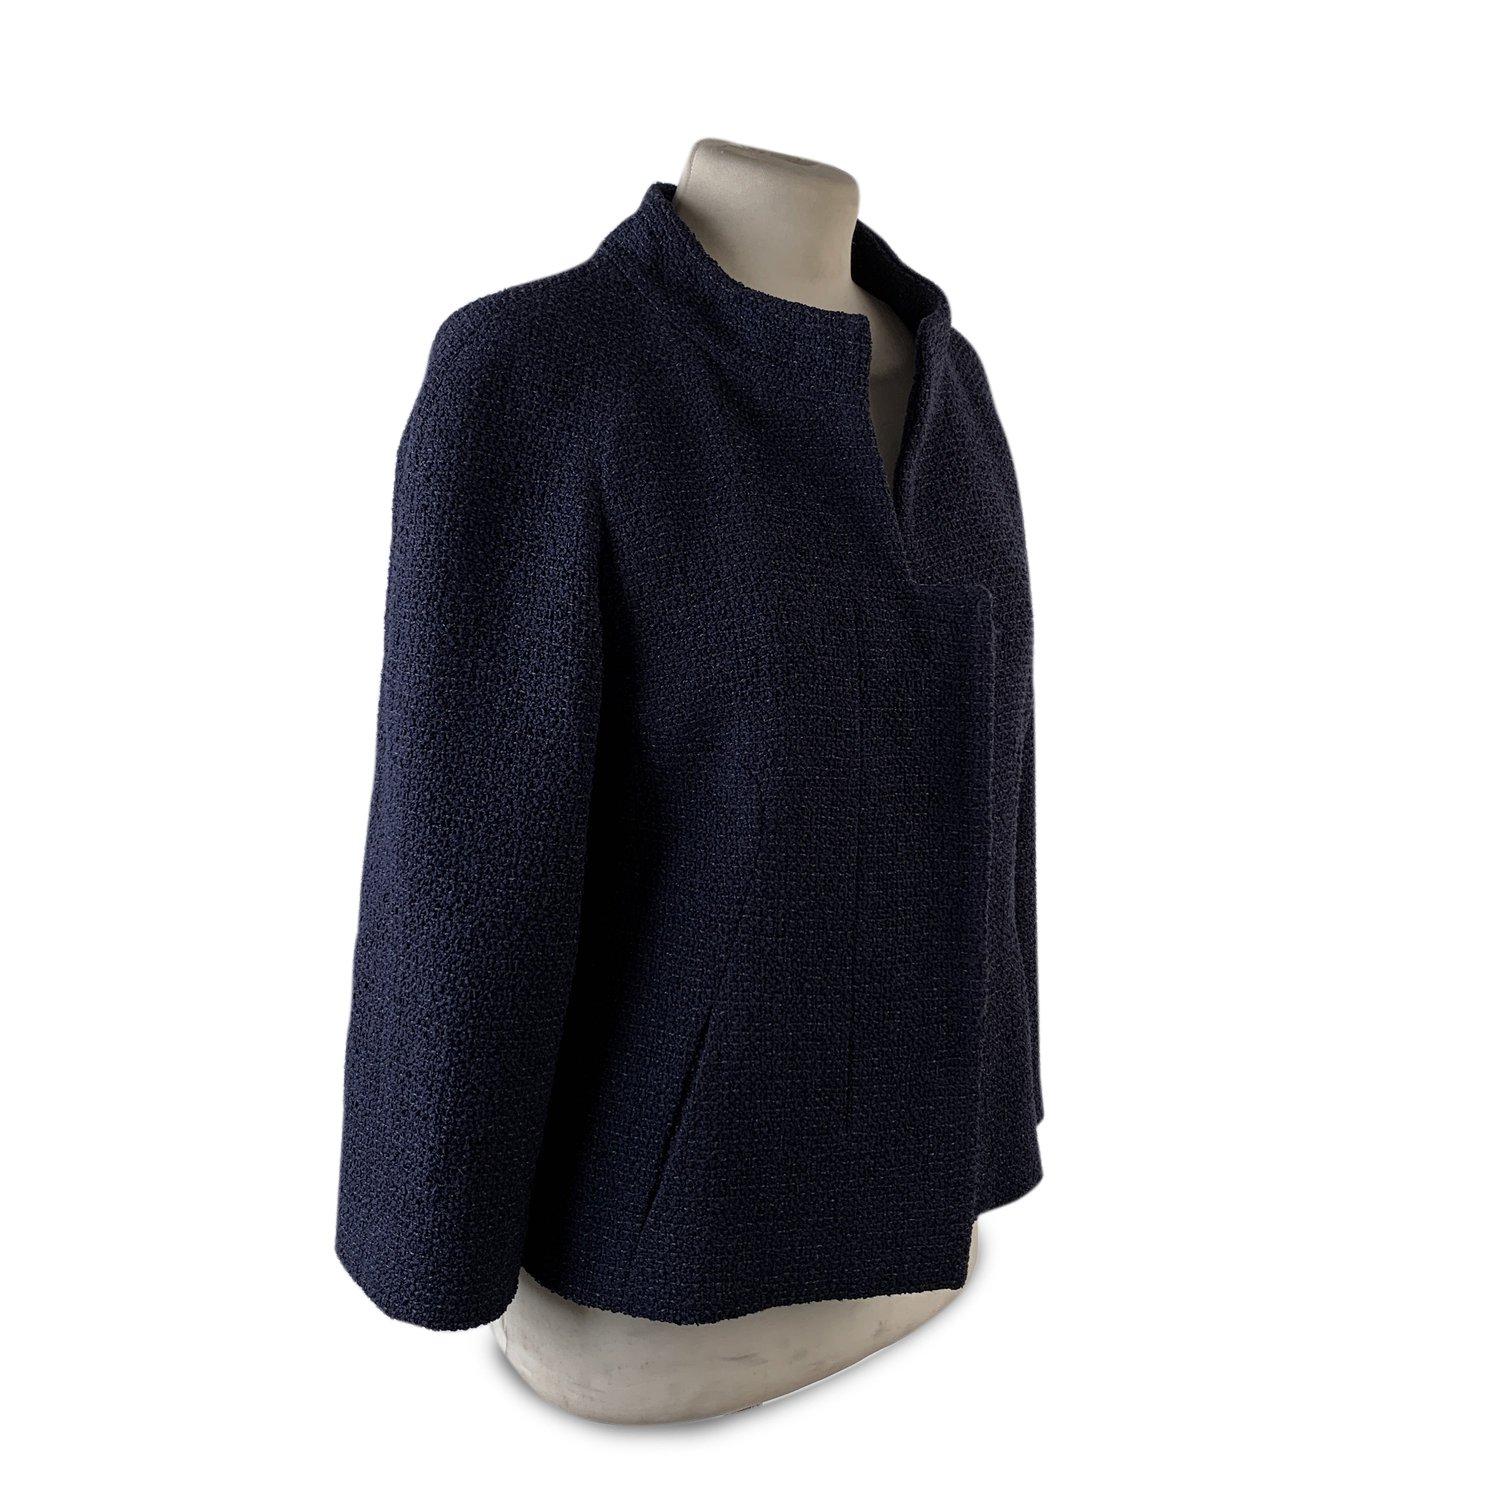 - Chanel Navy Blue Bouclé Blazer Jacket
- Concealed button closure on the front
- Round neck
- Composition: 72% Nylon,12% Cotton, 10% Wool, 6% Polyester
- Silk lining with jacquard Camellia pattern
- 2 pockets on thesides
- Silver metall chain